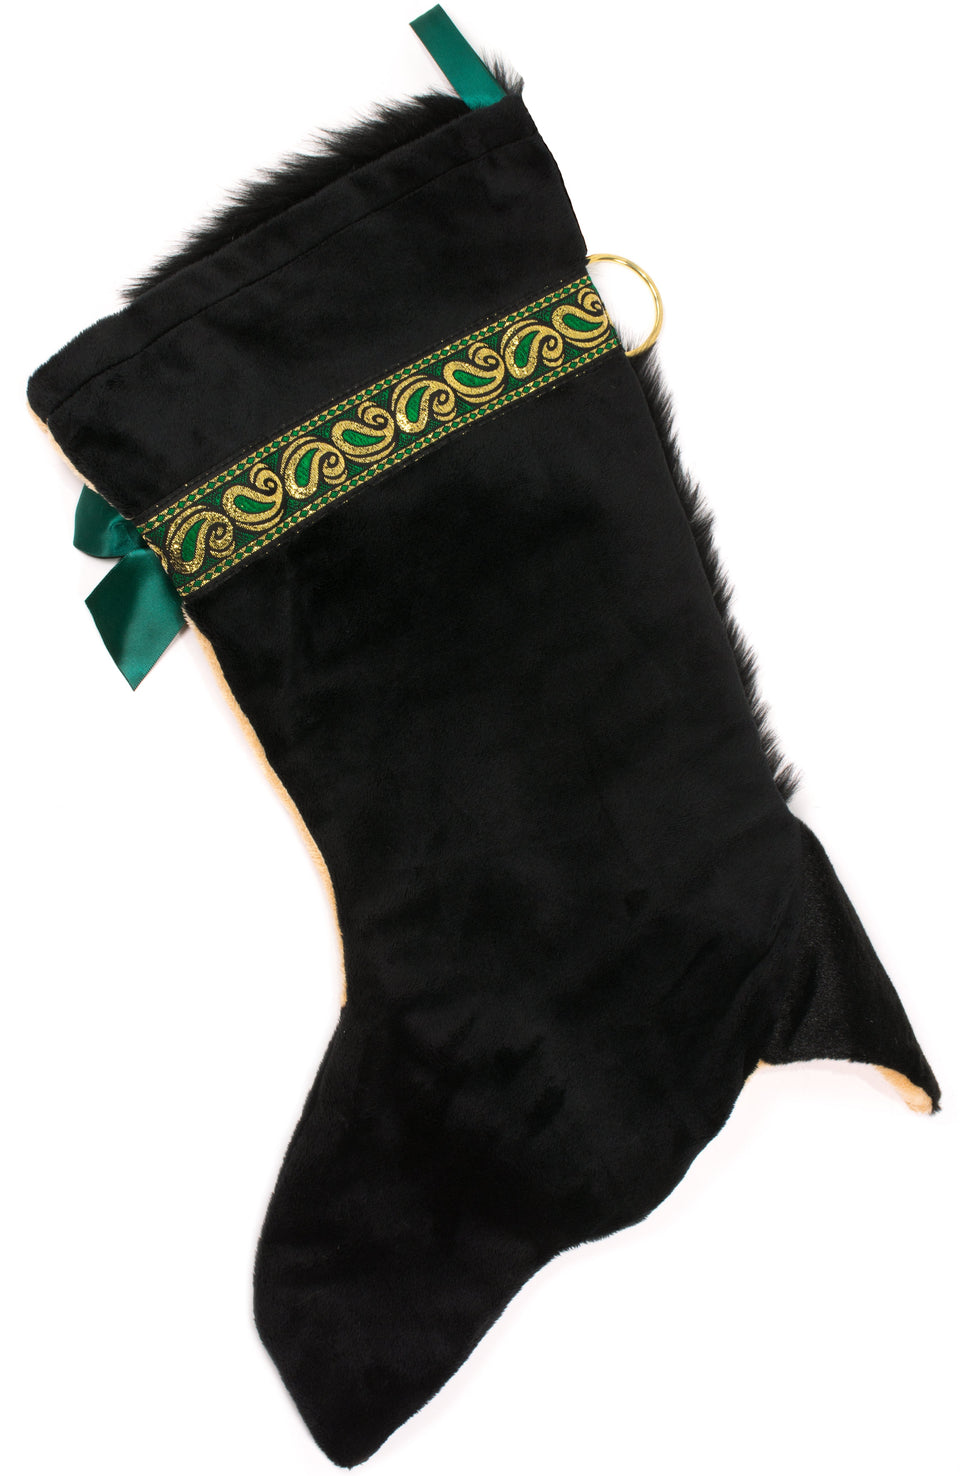 This German Shepherd dog shaped Christmas stocking is perfect for stuffing toys and treats into to spoil your fur baby for Christmas, or whatever holiday you celebrate!